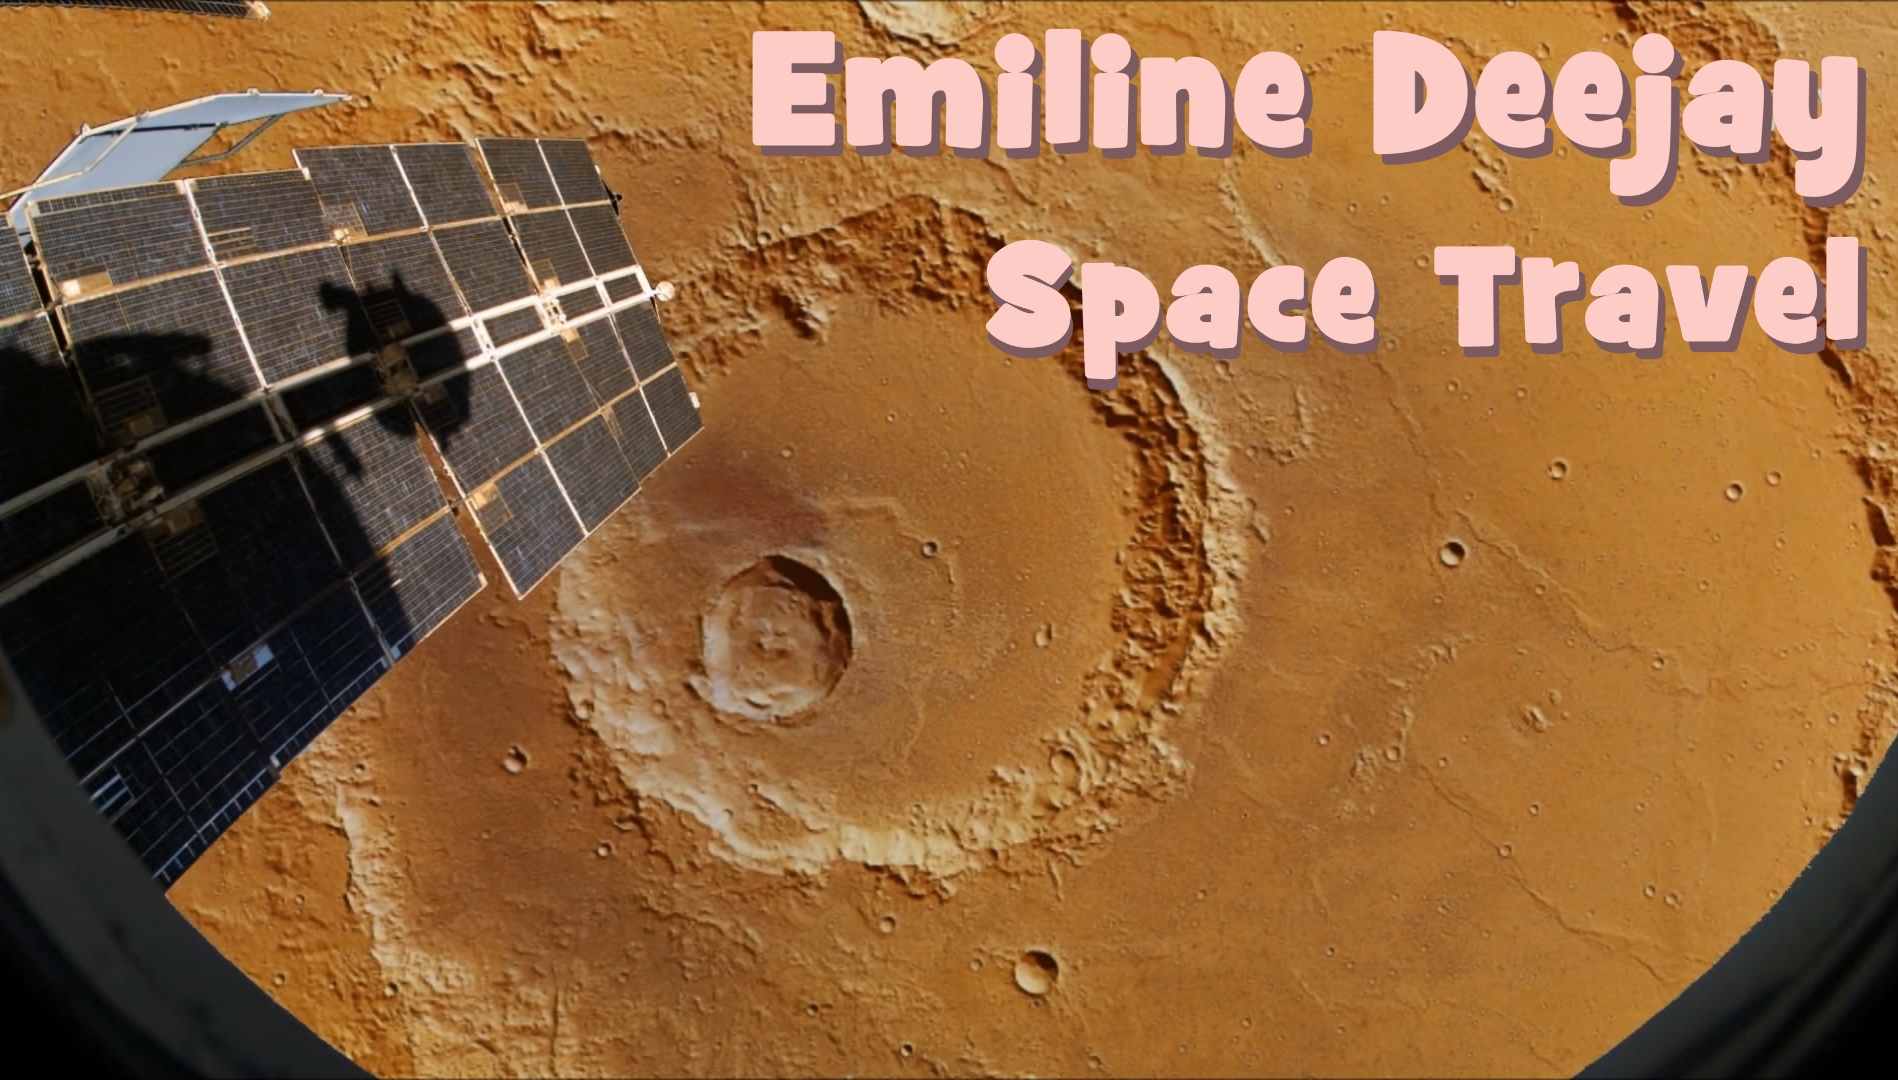 Space Travel by Emiline Deejay